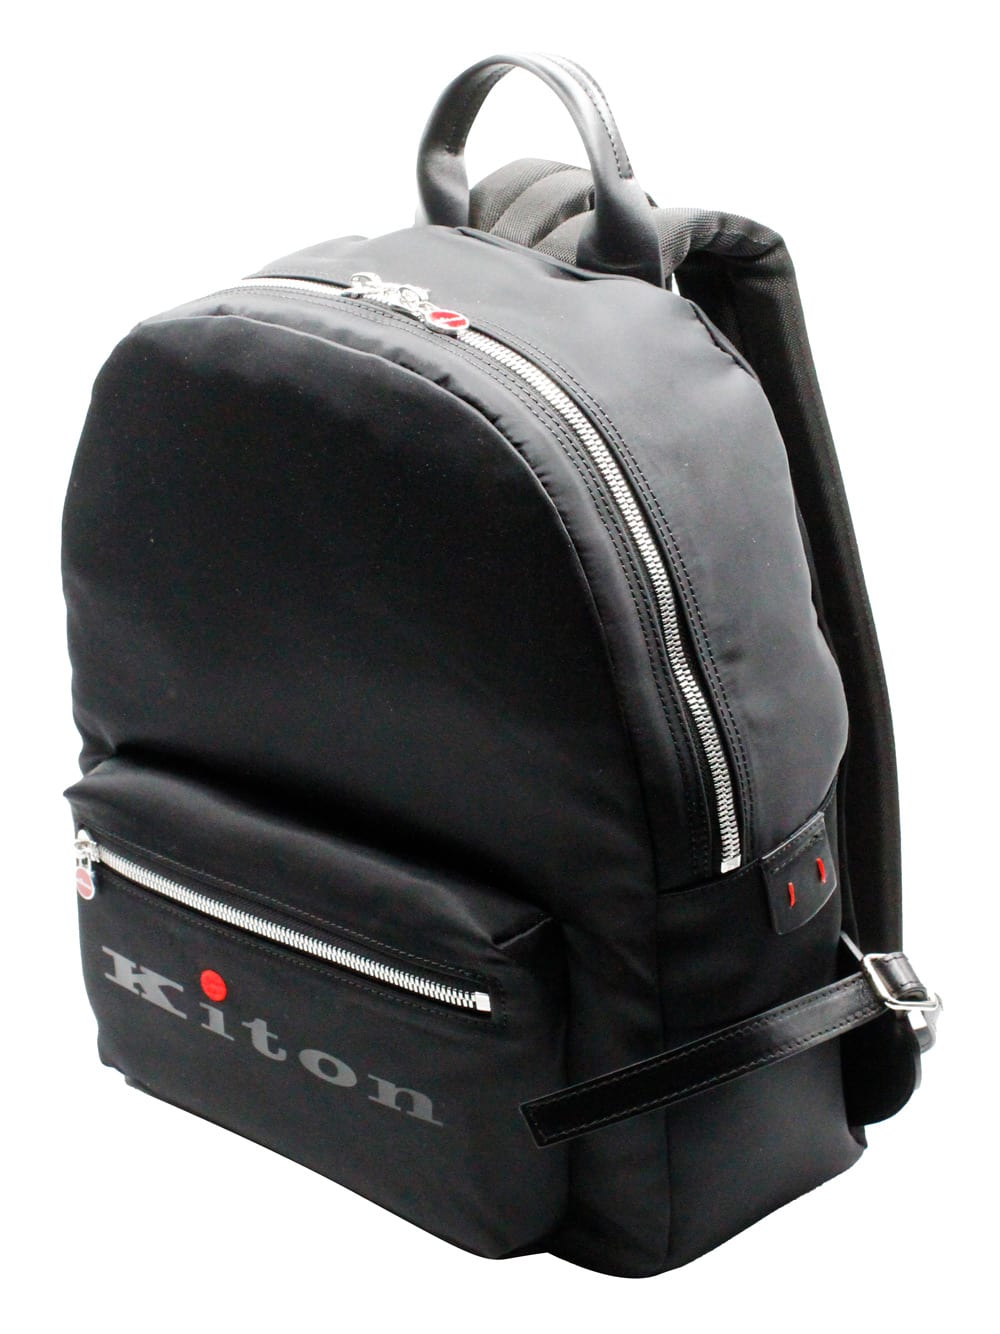 Backpack In Technical Fabric With Leather Inserts And Adjustable Shoulder Straps. Logo On The Front Pocket 40x33x15 Cm